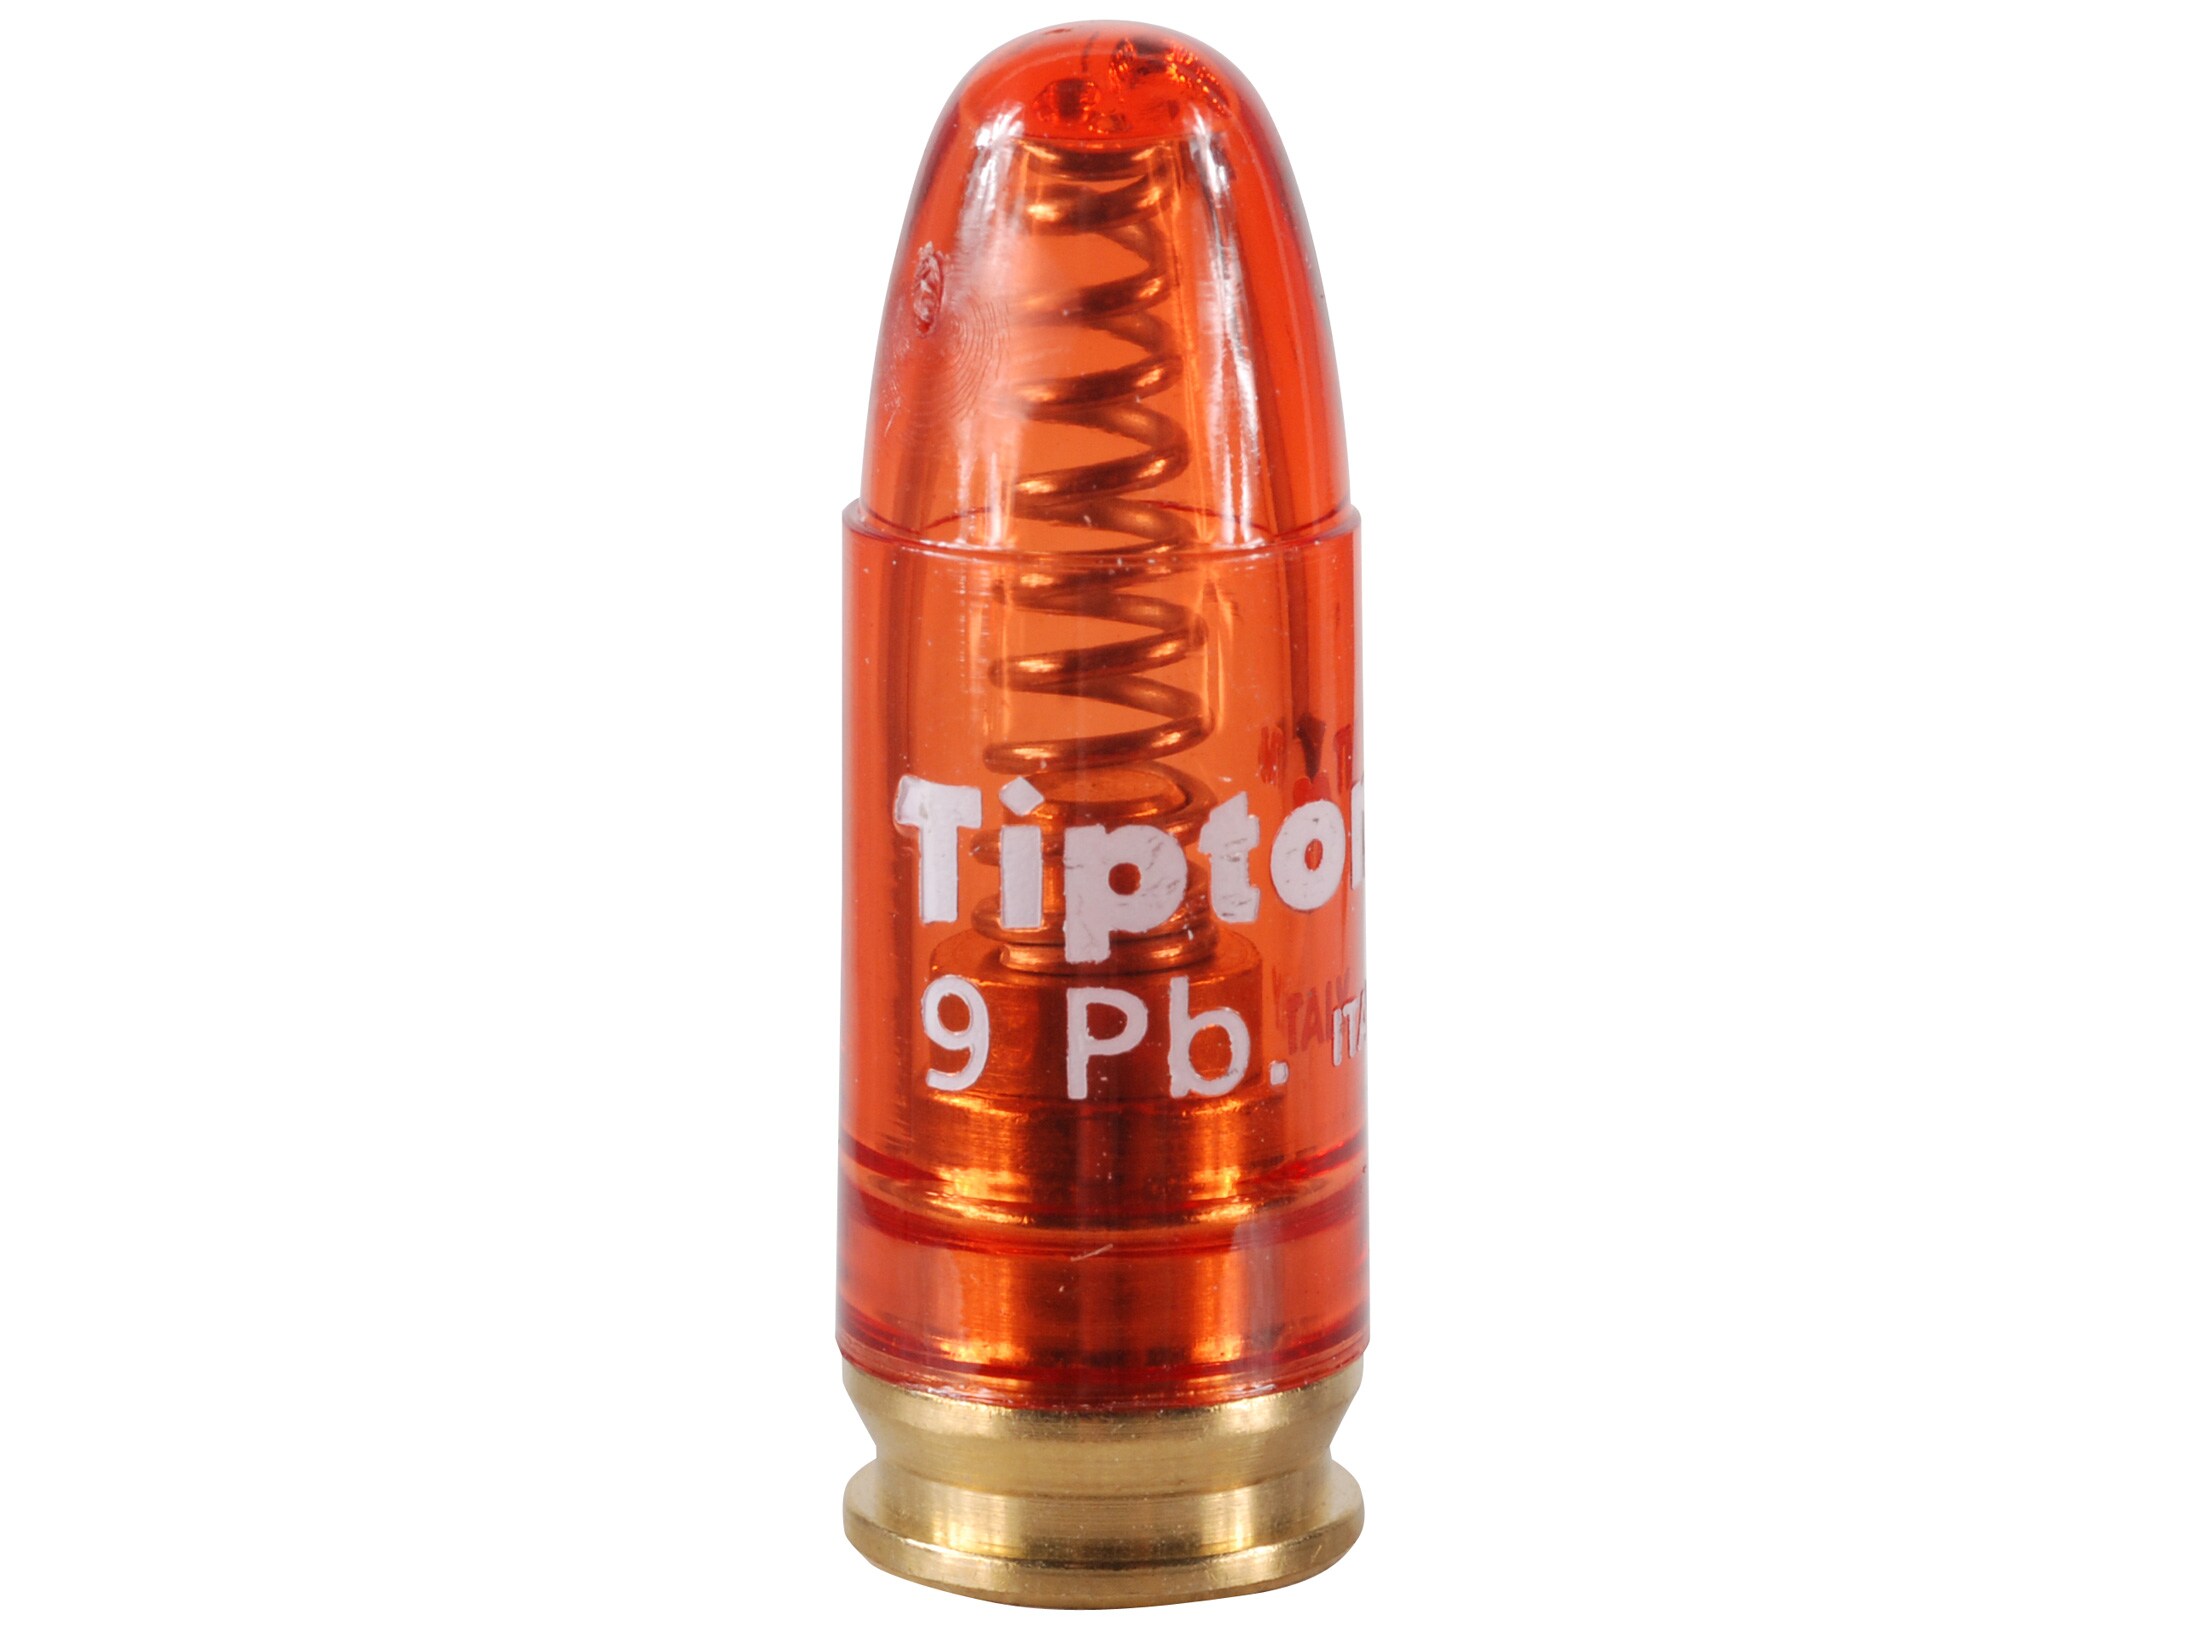 Tipton Snap Cap Polymer For Sale